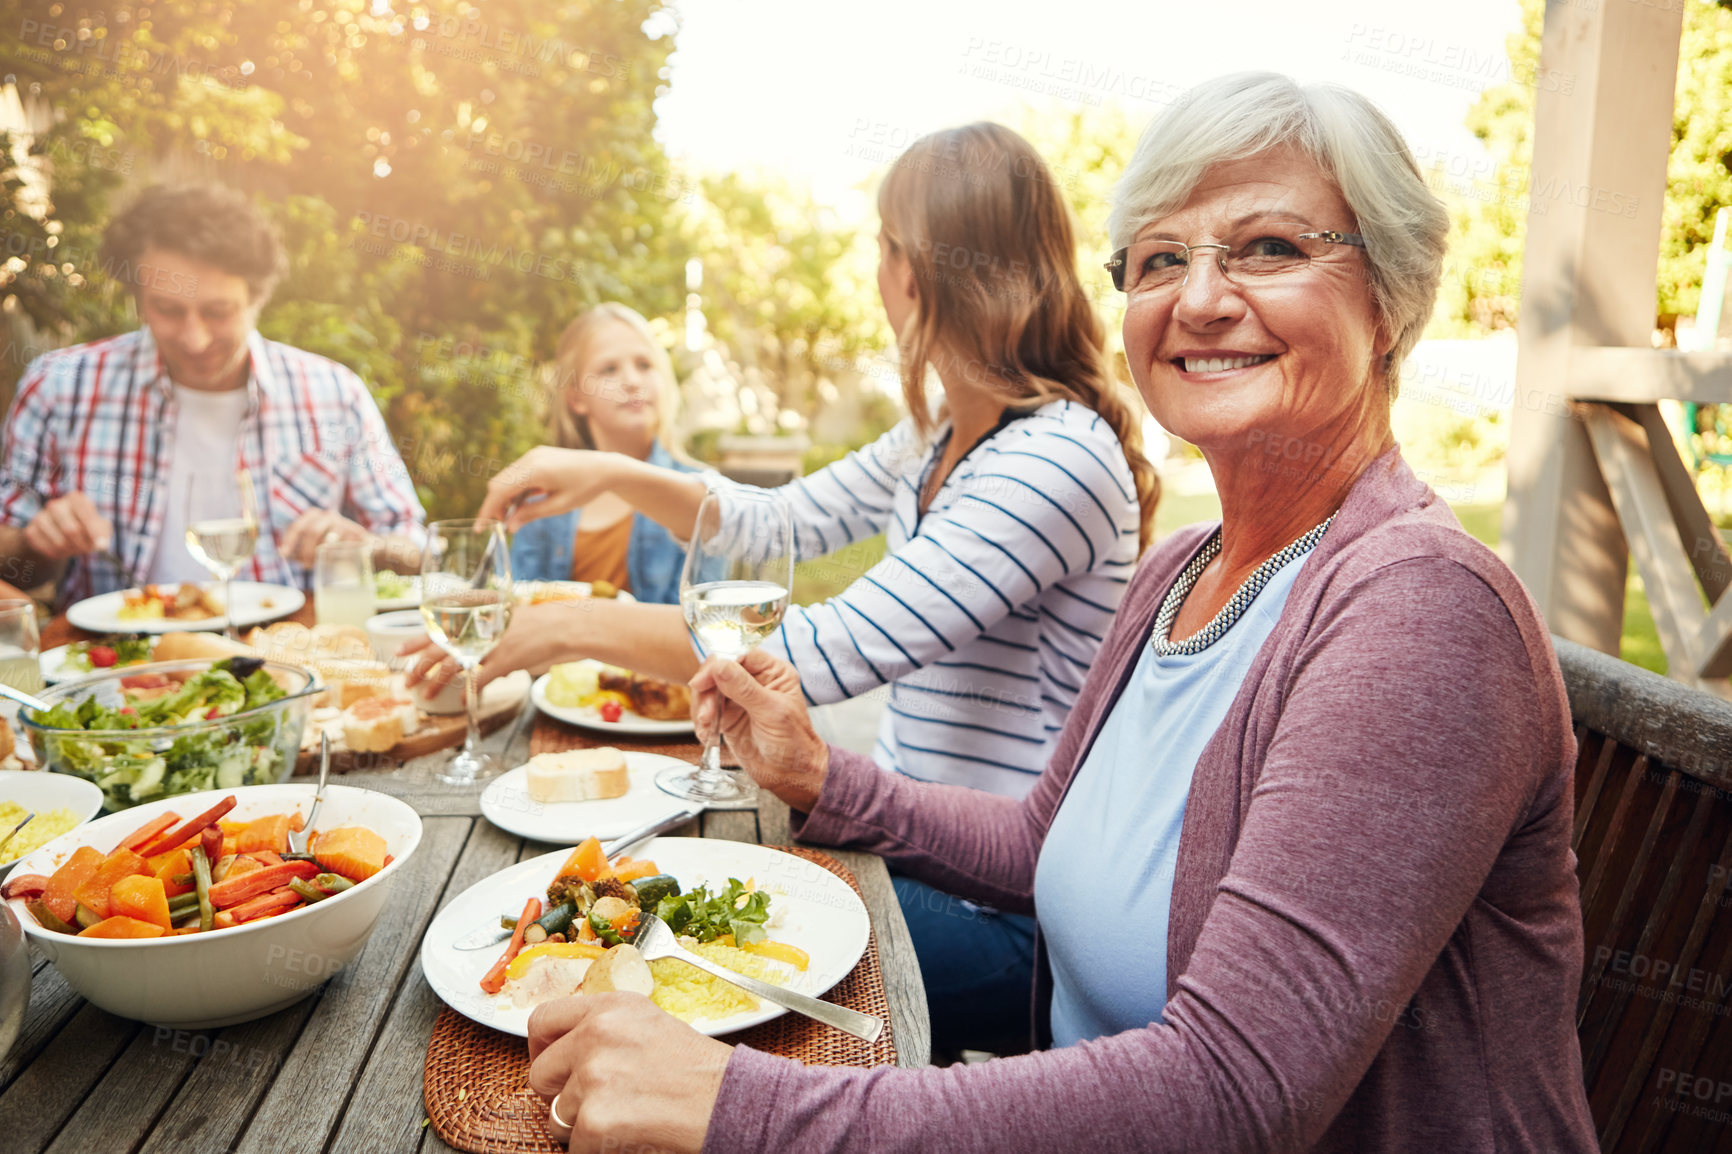 Buy stock photo Portrait of a happy elderly woman enjoying an outdoor lunch with her family